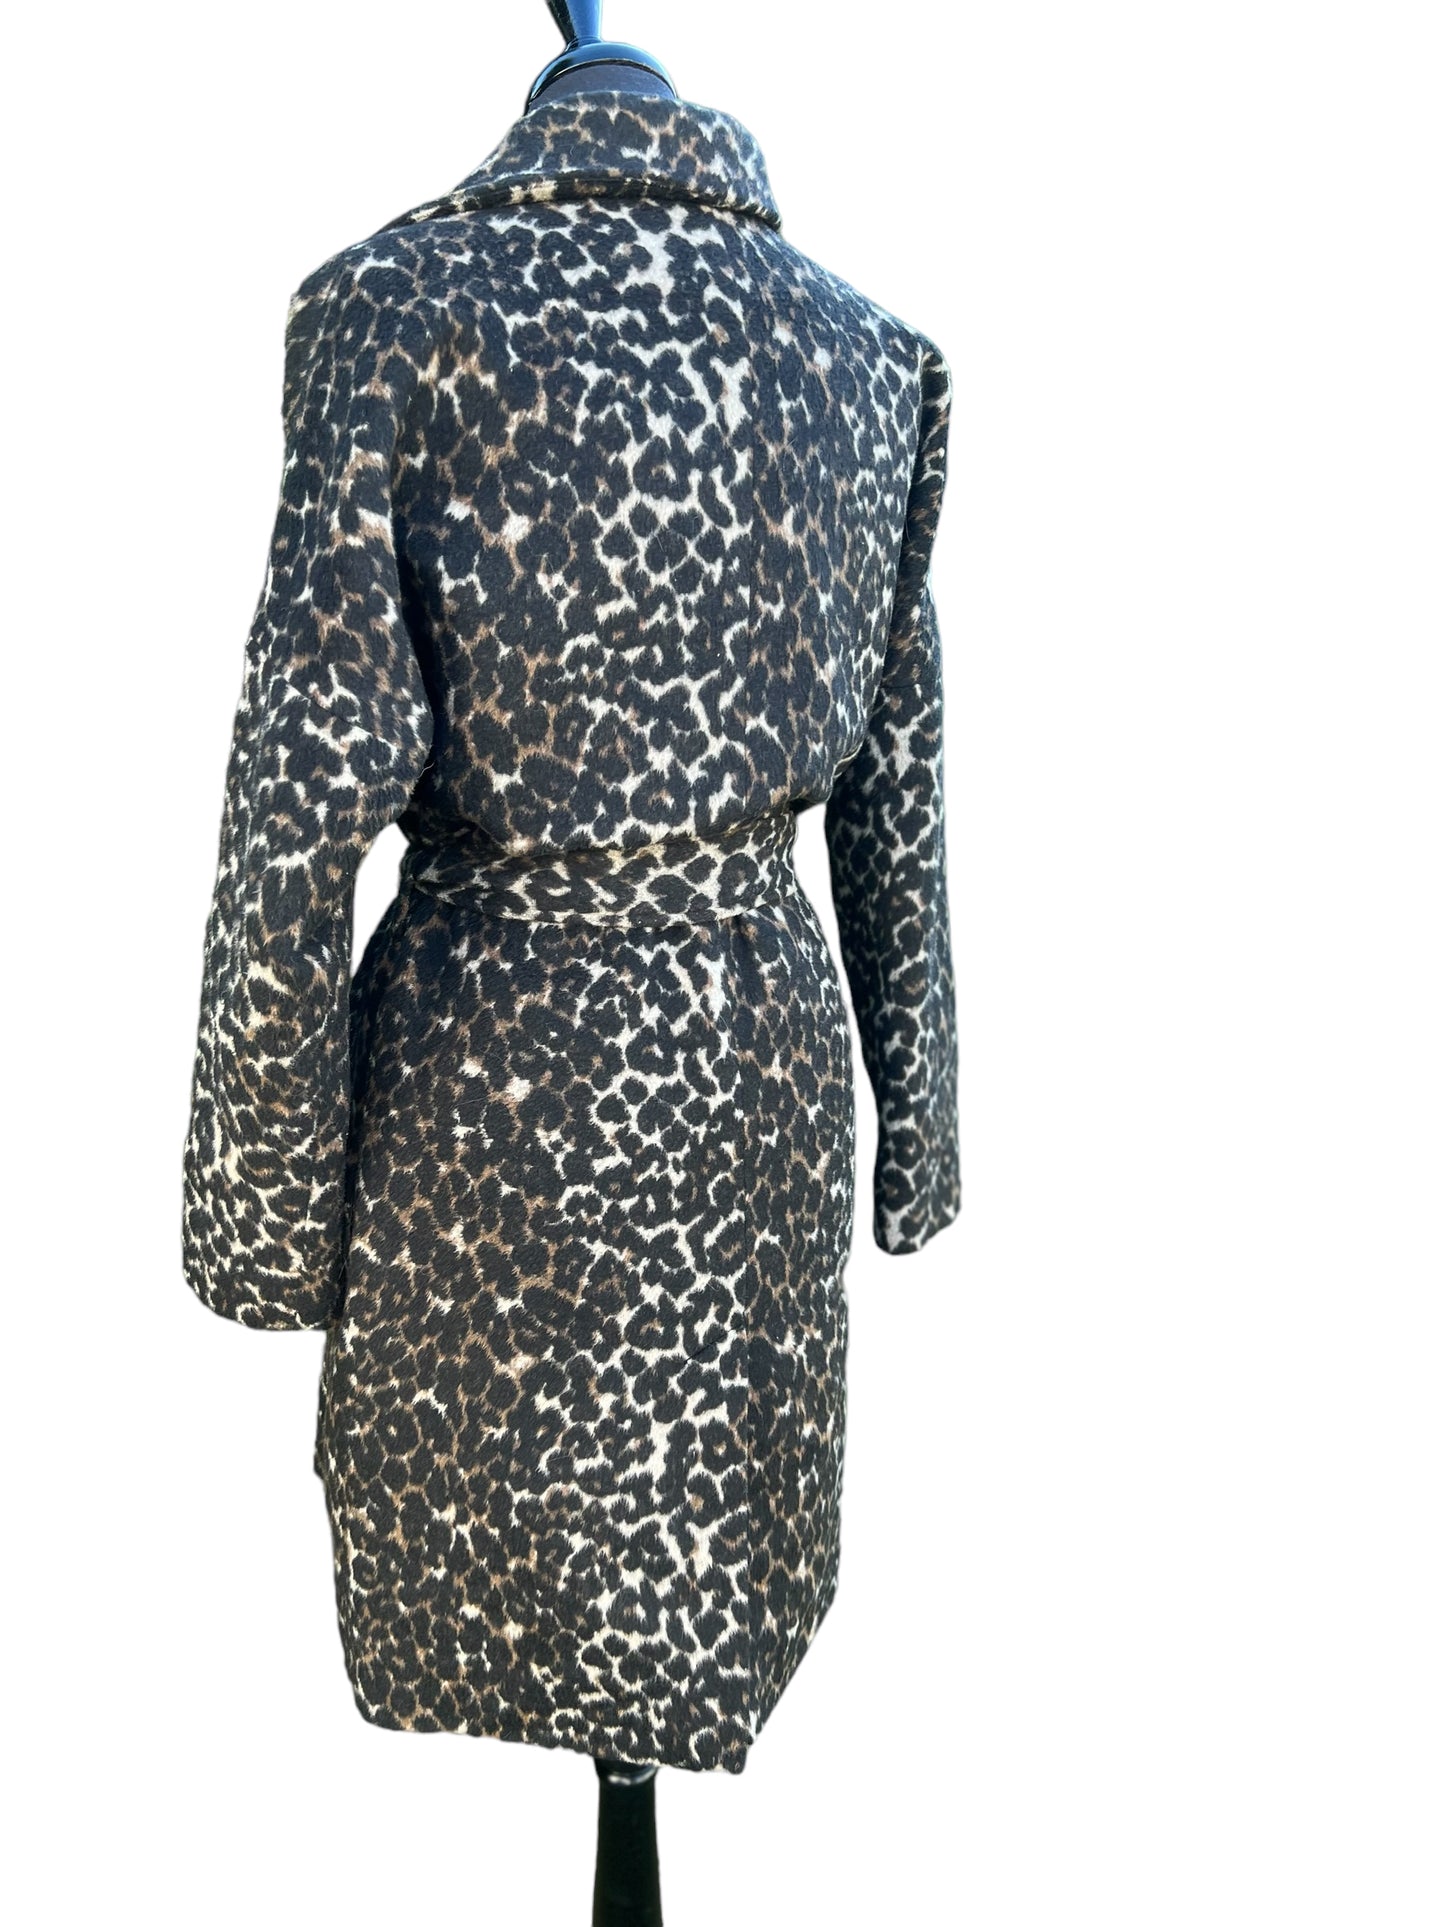 Lord & Taylor Animal Print Belted Coat